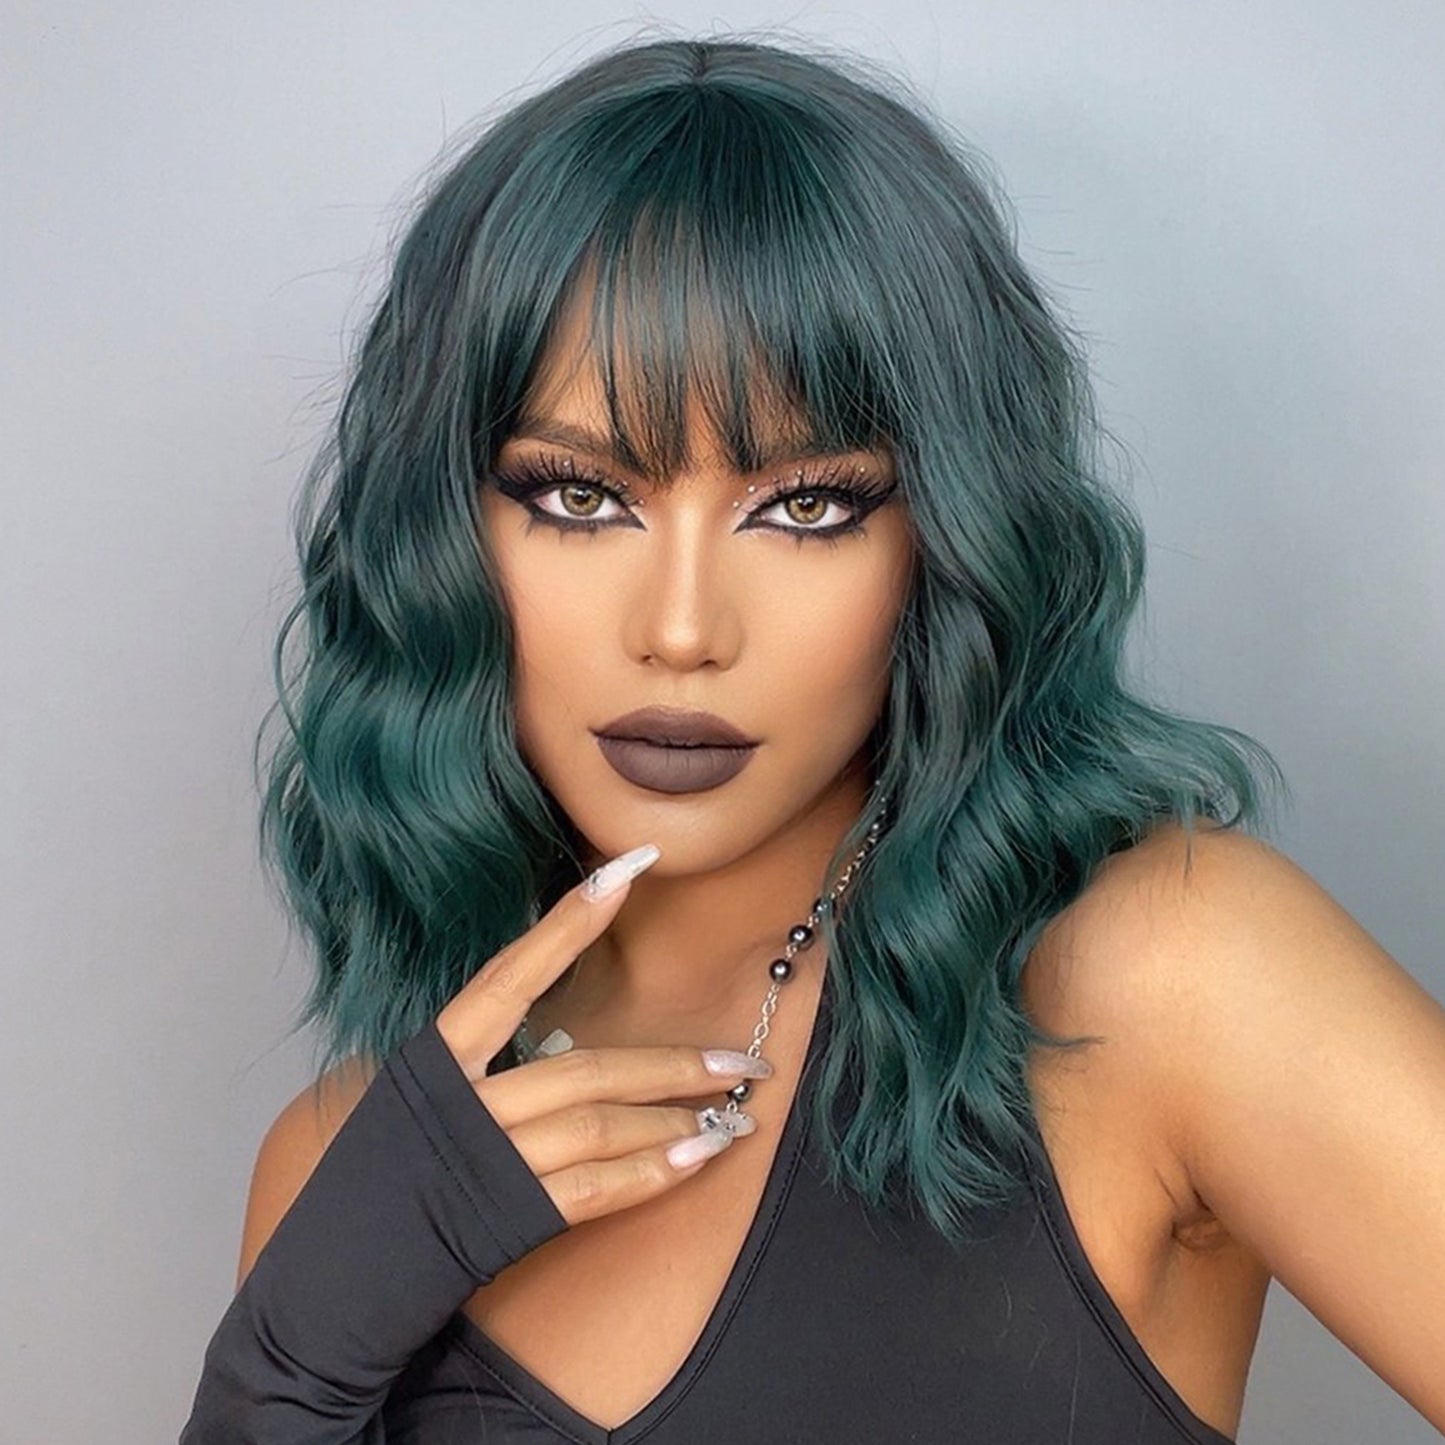 【Giselle】Loxology | 16 Inch Green Ombre Wavy BOB wigs for Women for Daily Life Use